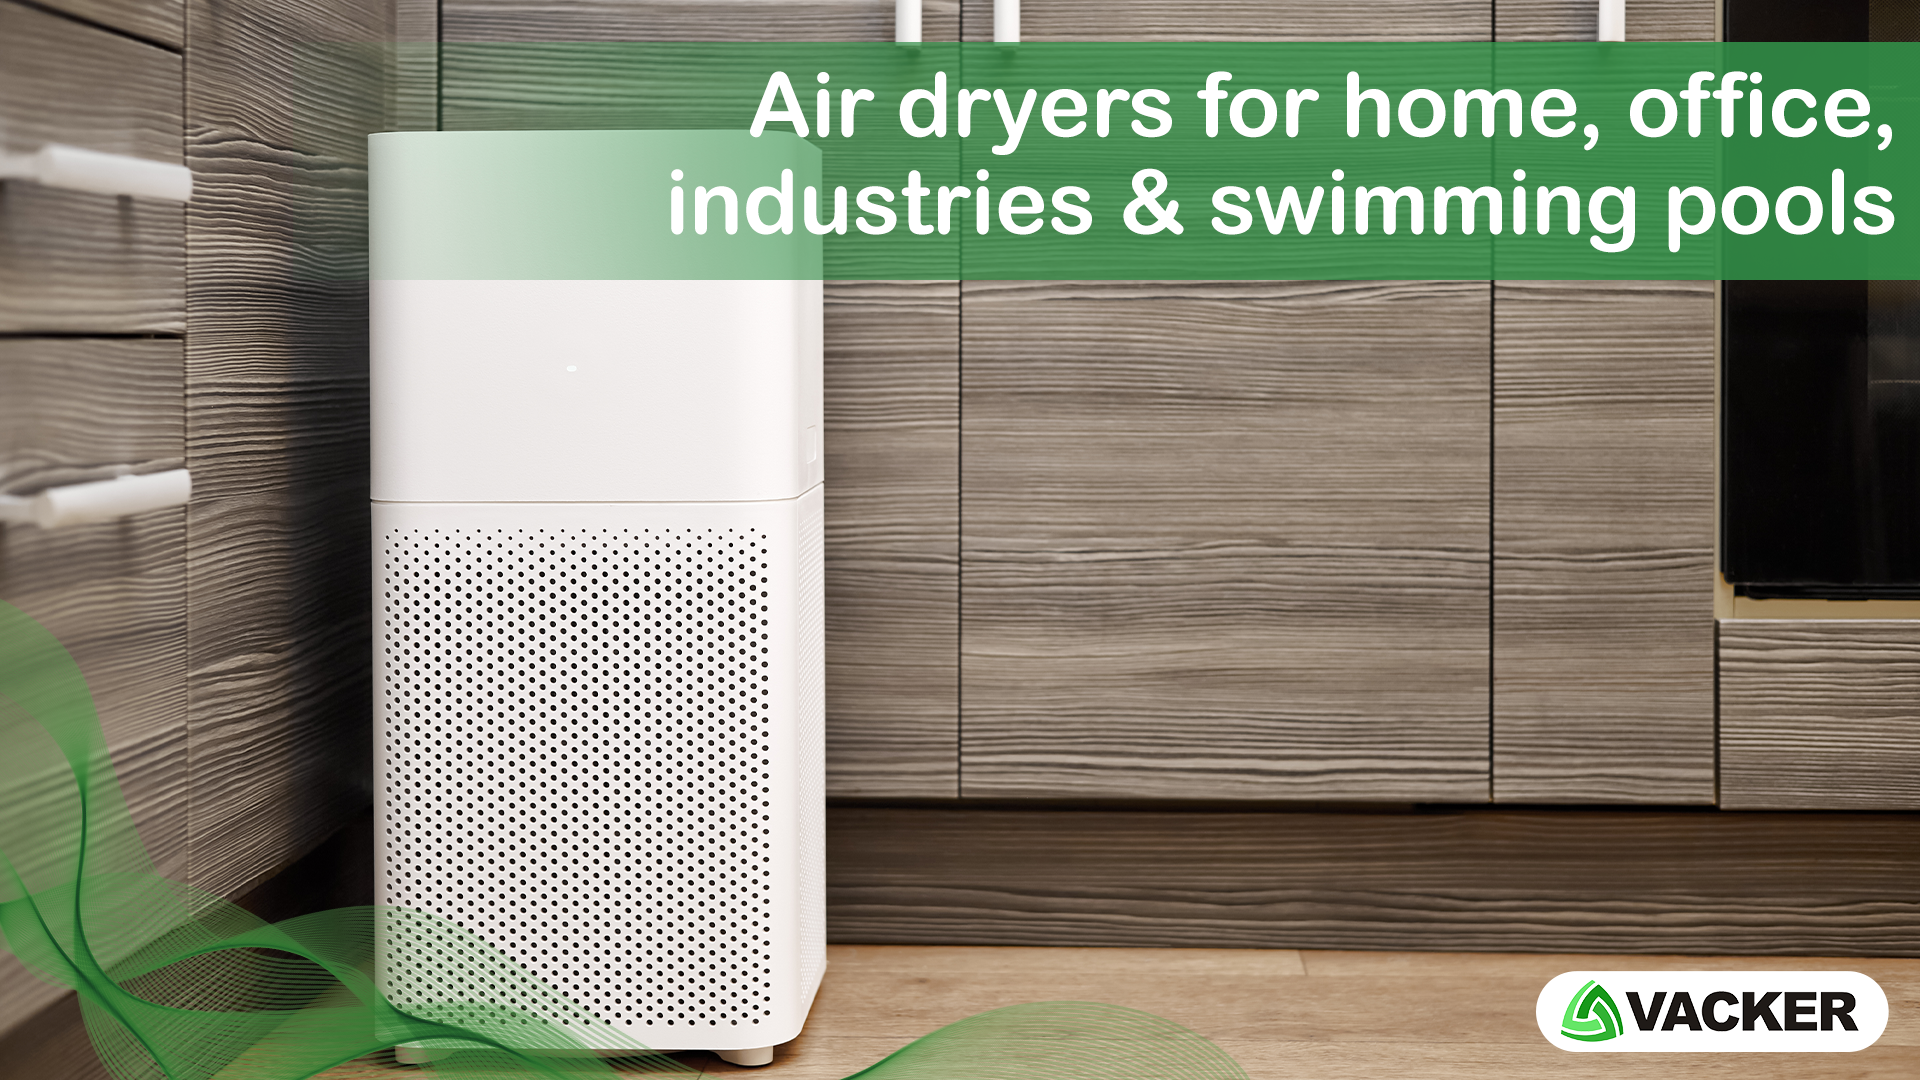 Air dryers for home, office, industries & swimming pools